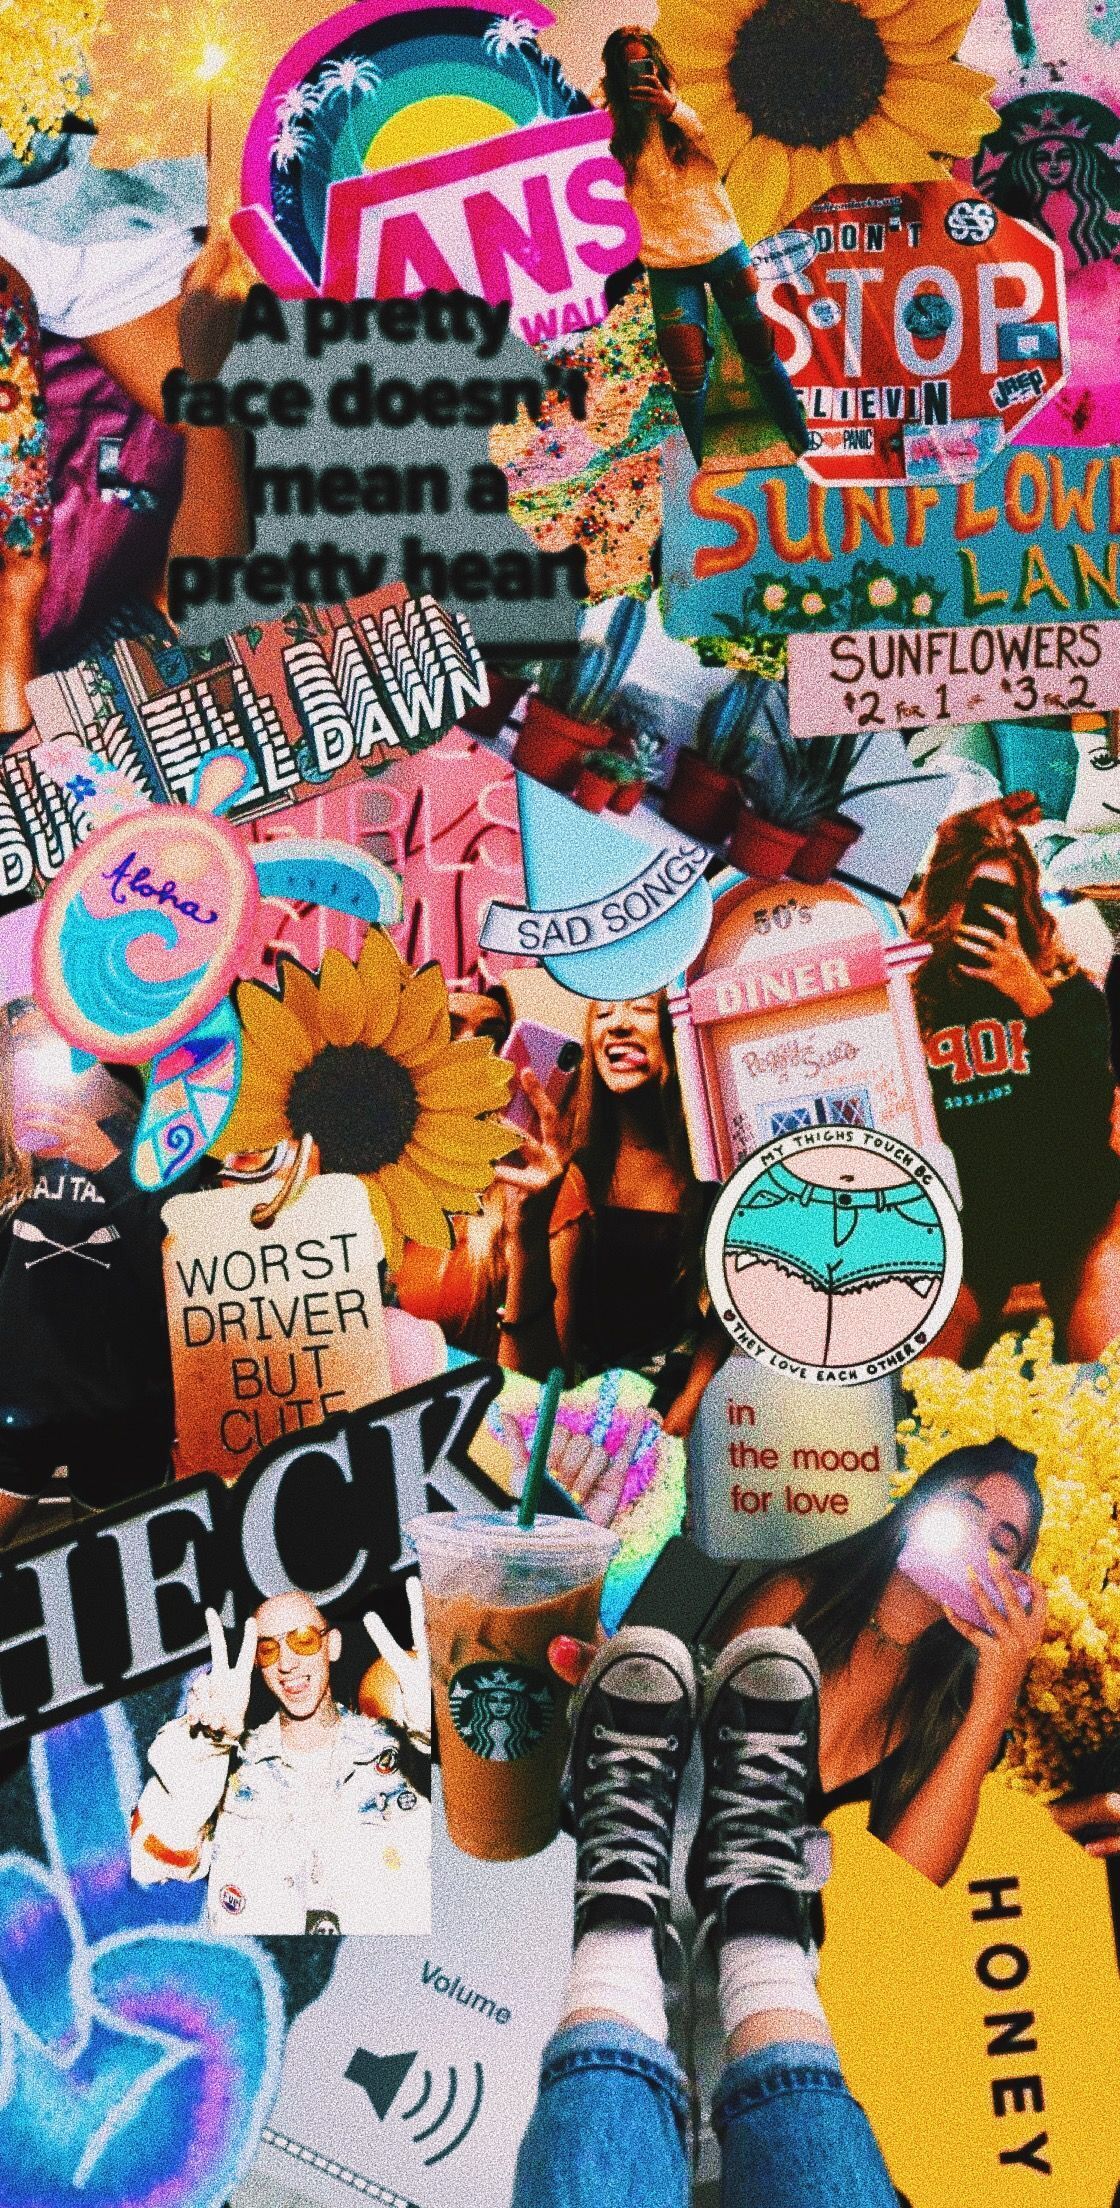 Aesthetic background with a collage of images including Vans, Starbucks, and a rainbow - VSCO, skater